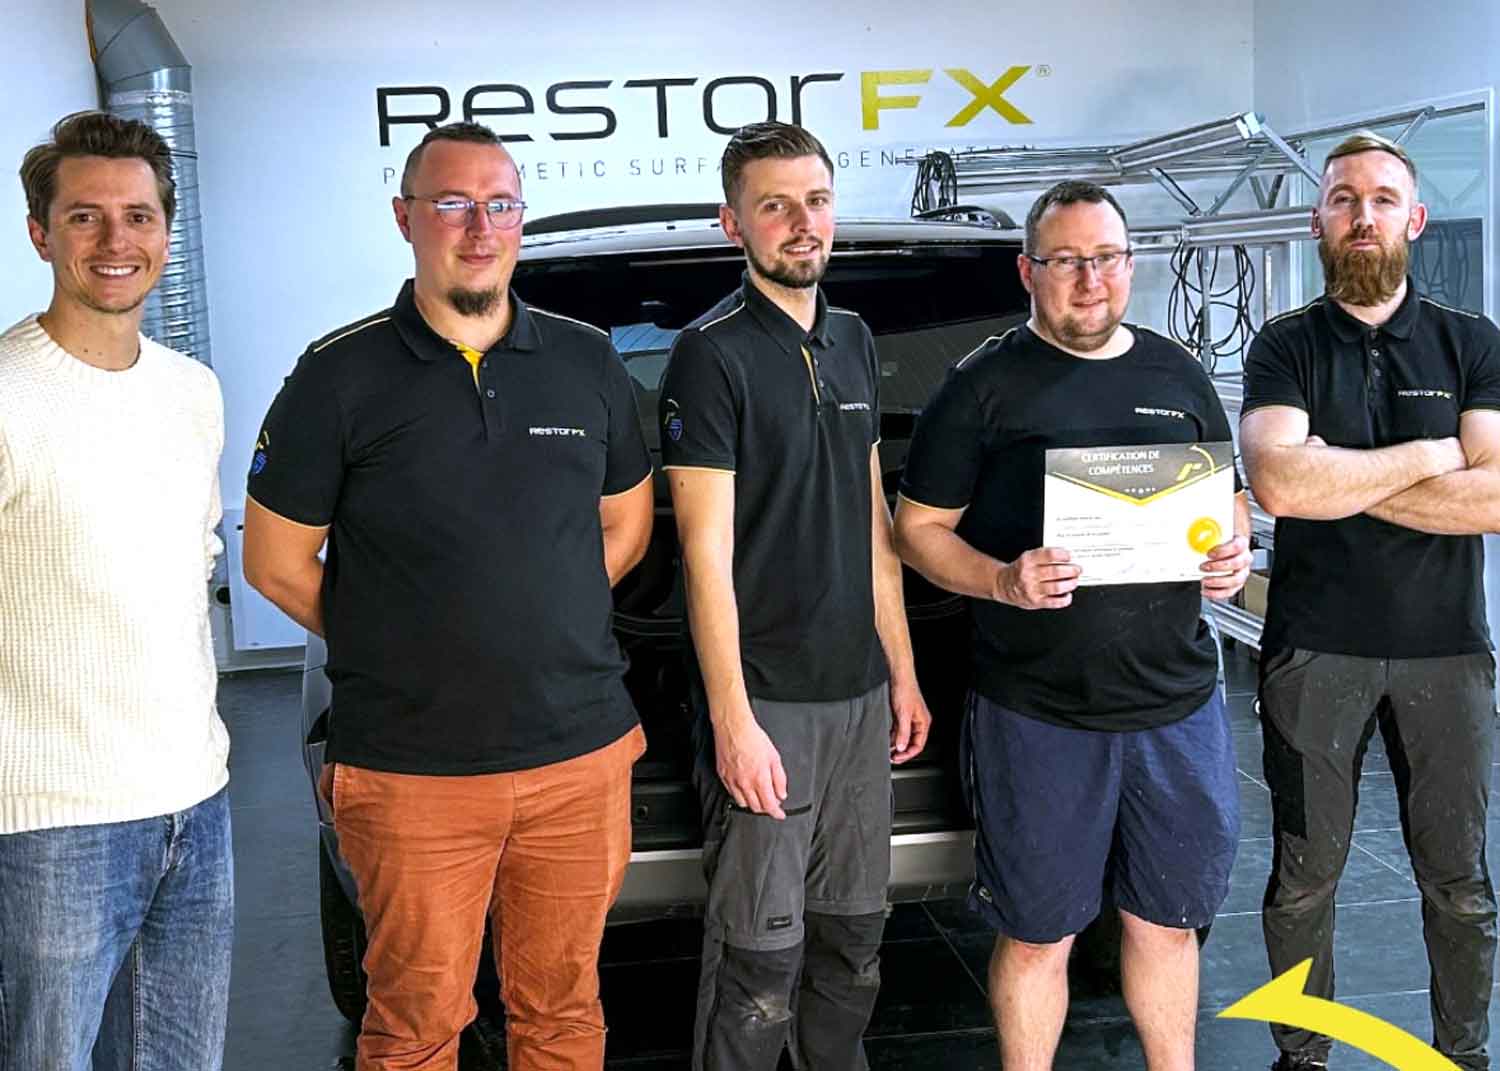 RestorFX La Rochelle team inside the brightly lit shop area with RestorFX sign on white wall and a black SUV  in the background